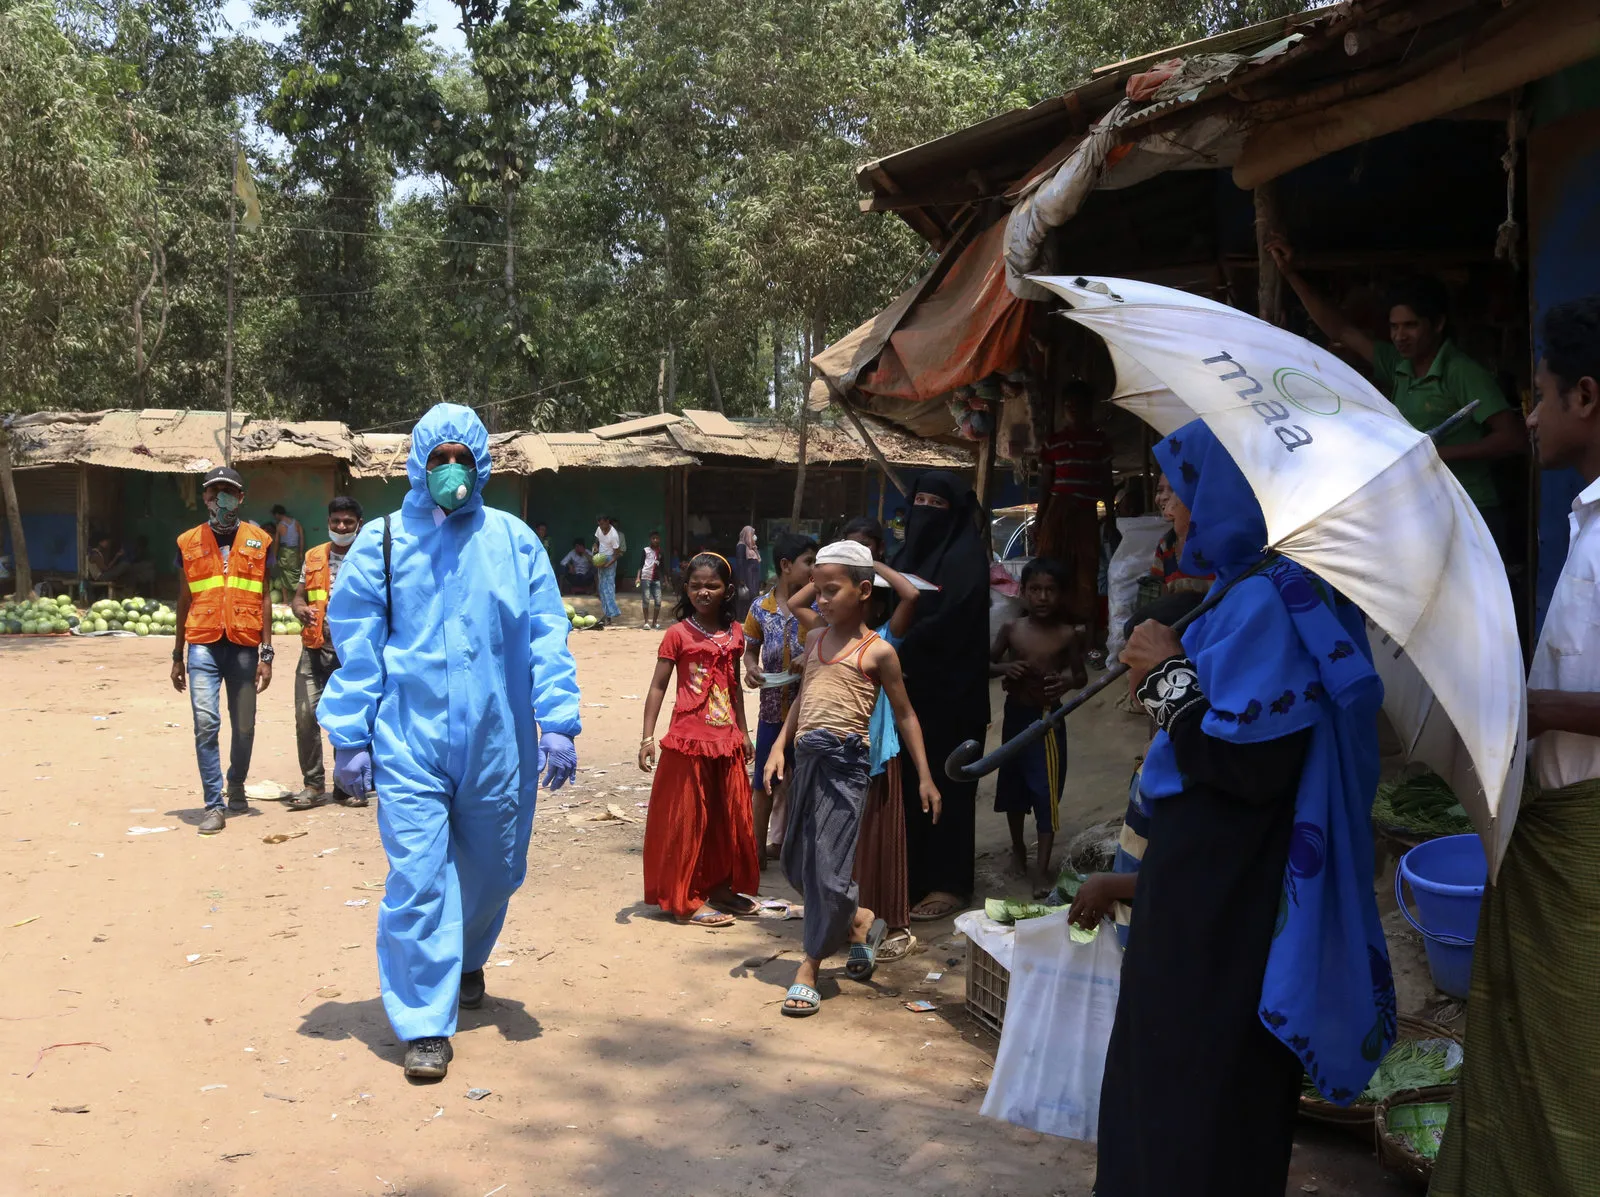 A health worker wearing personal protective equipment in the Kutupalong Rohingya refugee camp in Cox's Bazar, Bangladesh, last month. On Thursday, Bangladesh reported the area's first confirmed coronavirus infections. Shafiqur Rahman/AP